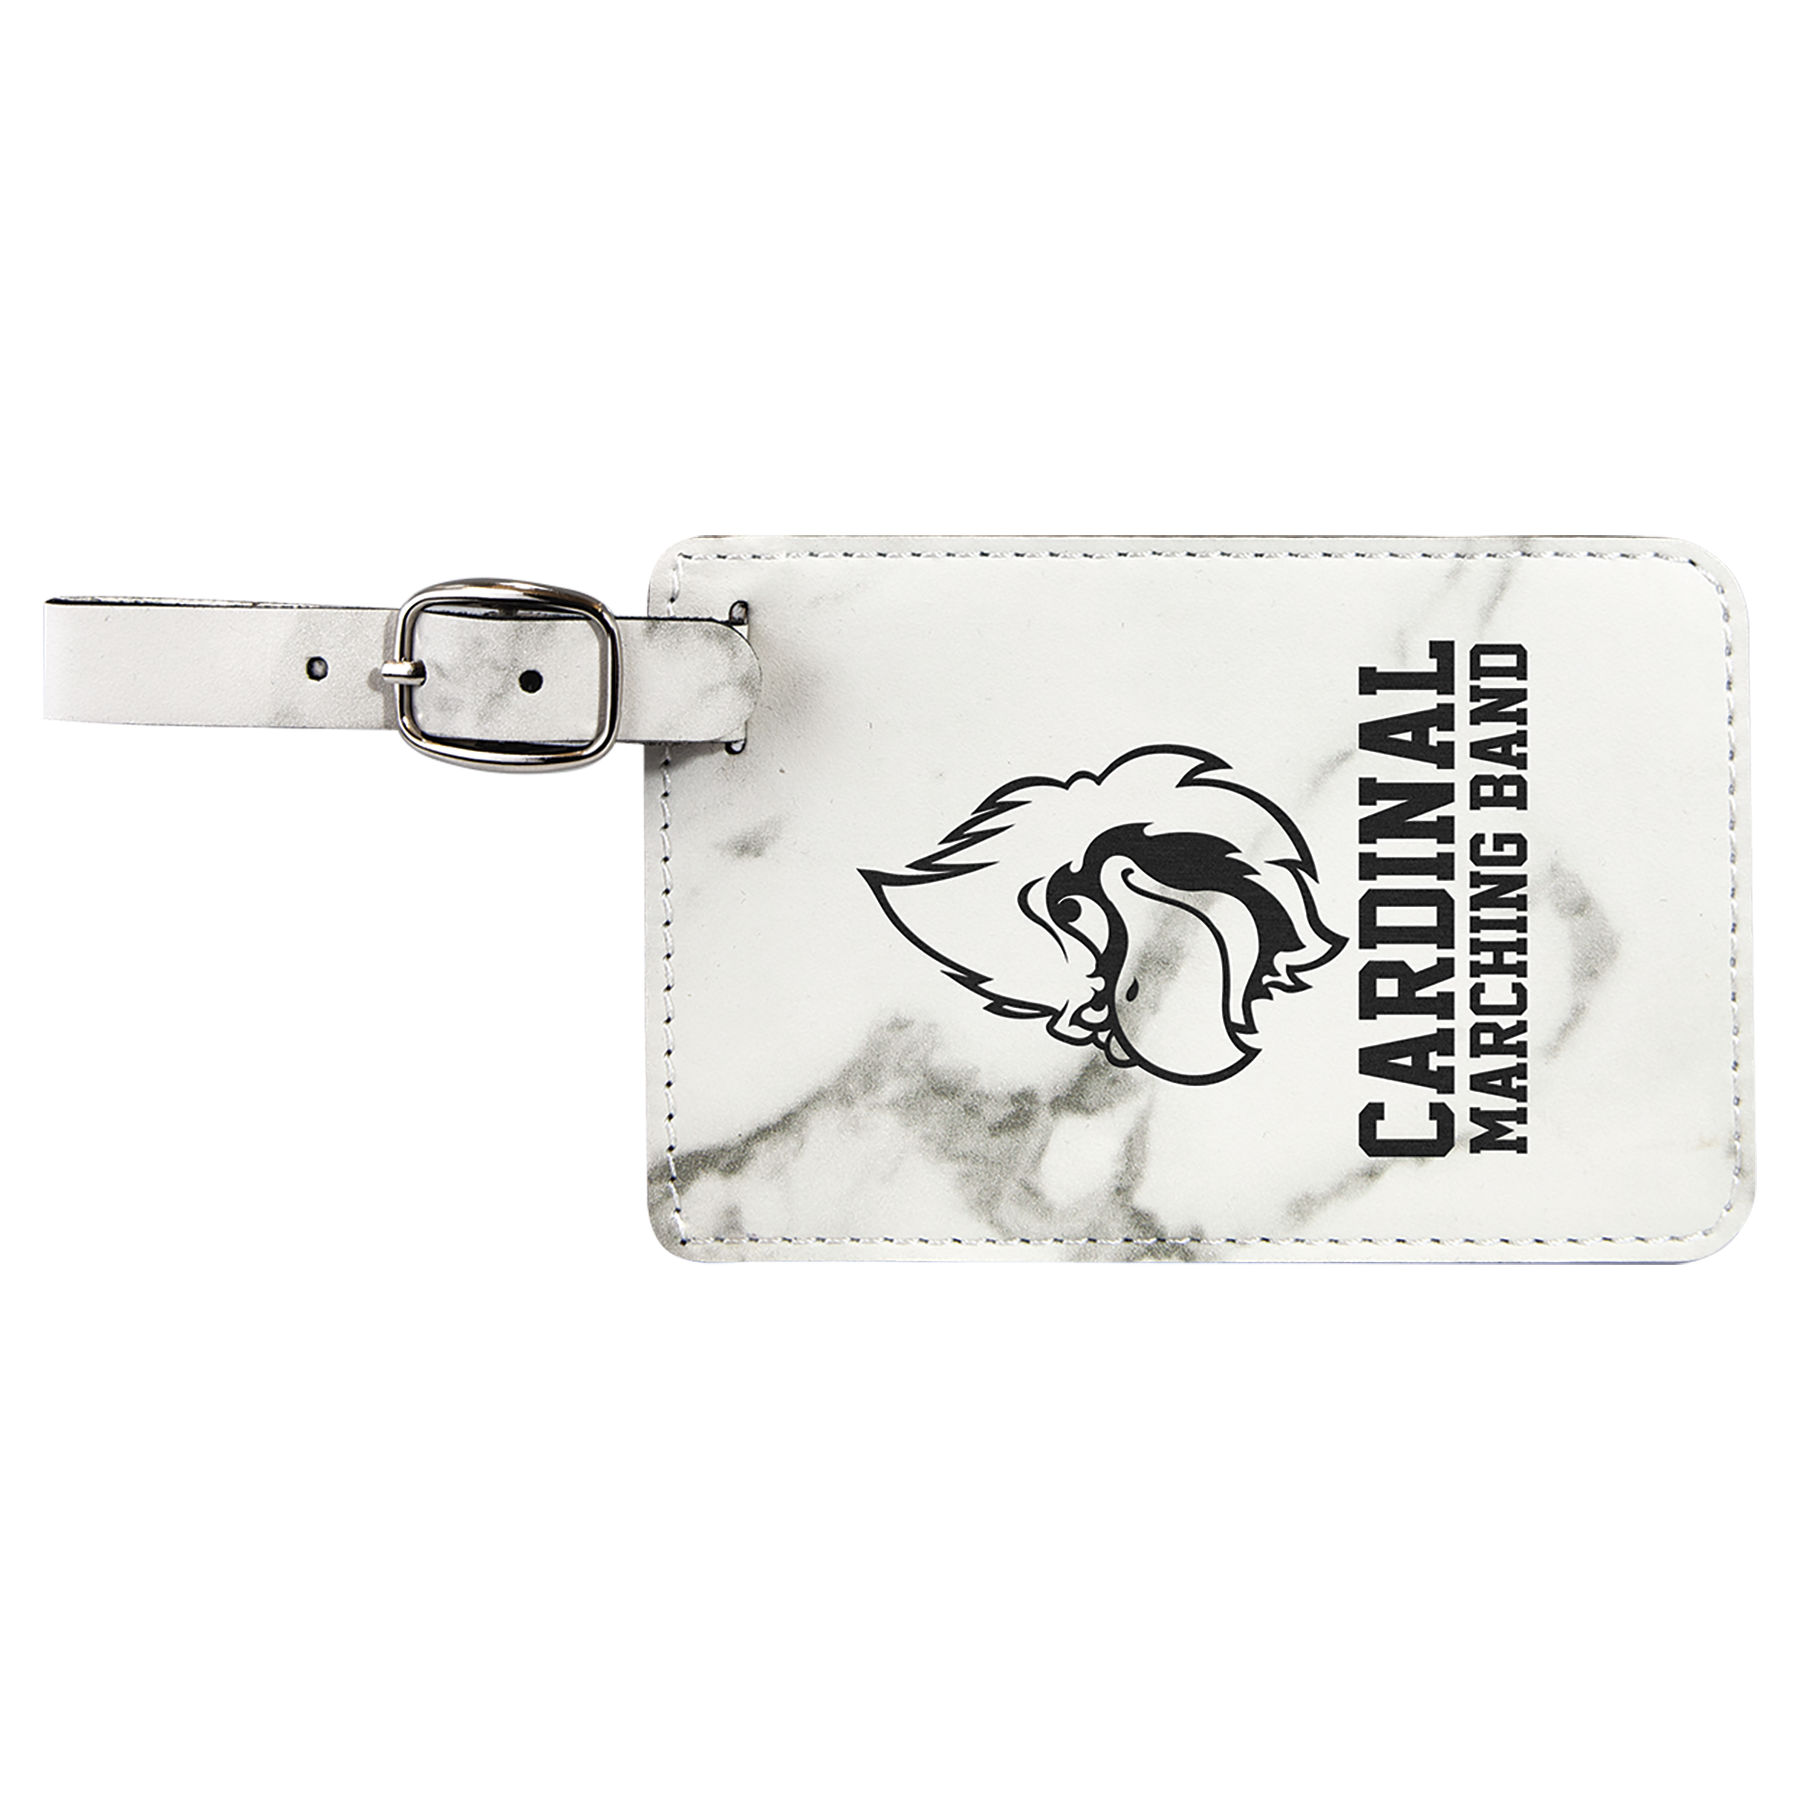 Luggage Tags – Clare V.